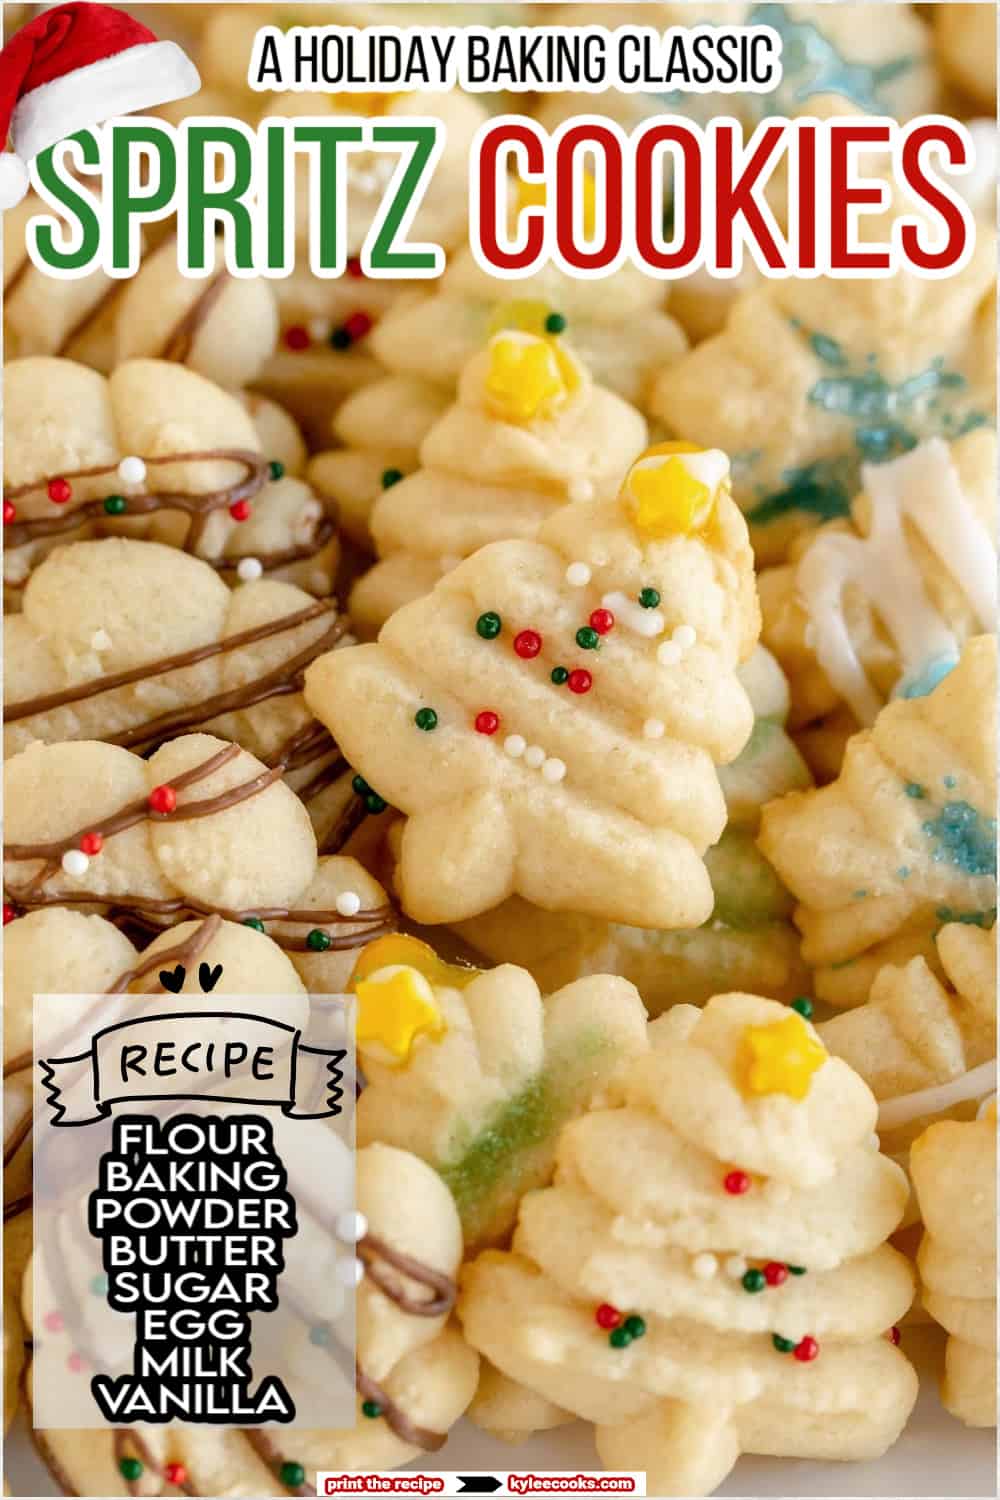 spritz cookies with recipe name overlaid in text.